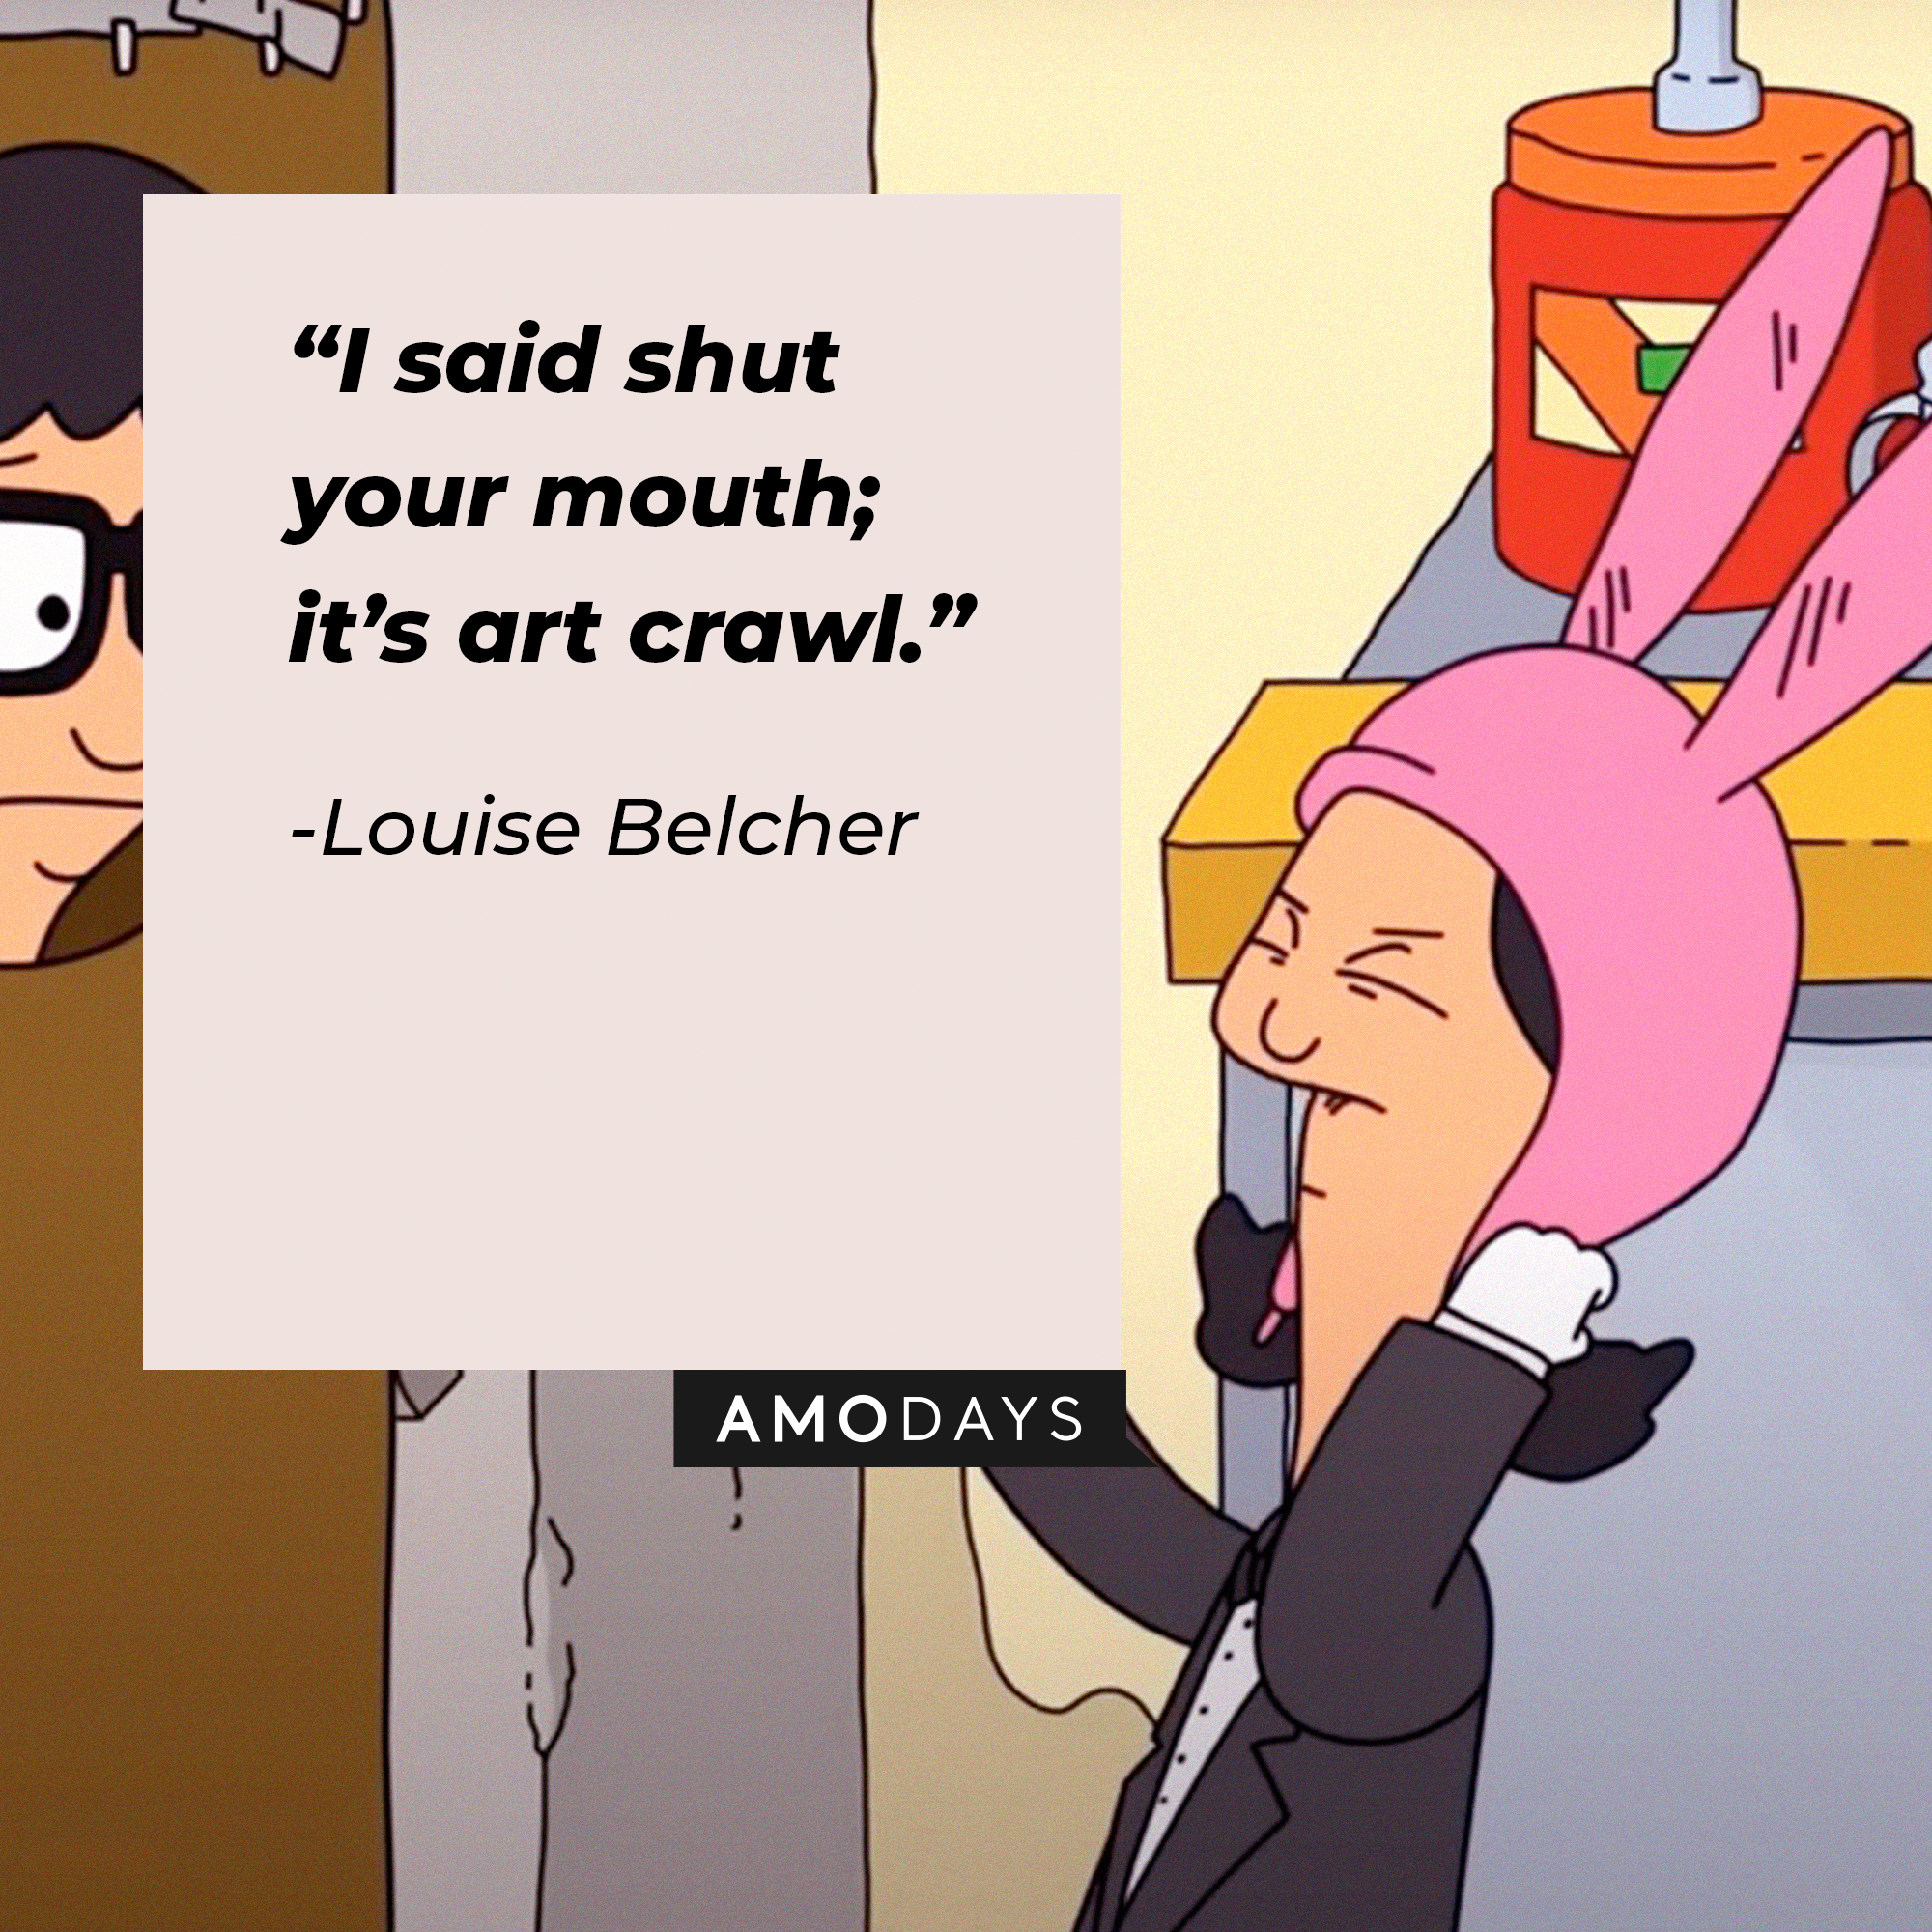 An image of Louise Belcher with her quote: “I said shut your mouth; it’s art crawl.”  |  Source:  facebook.com/BobsBurgers